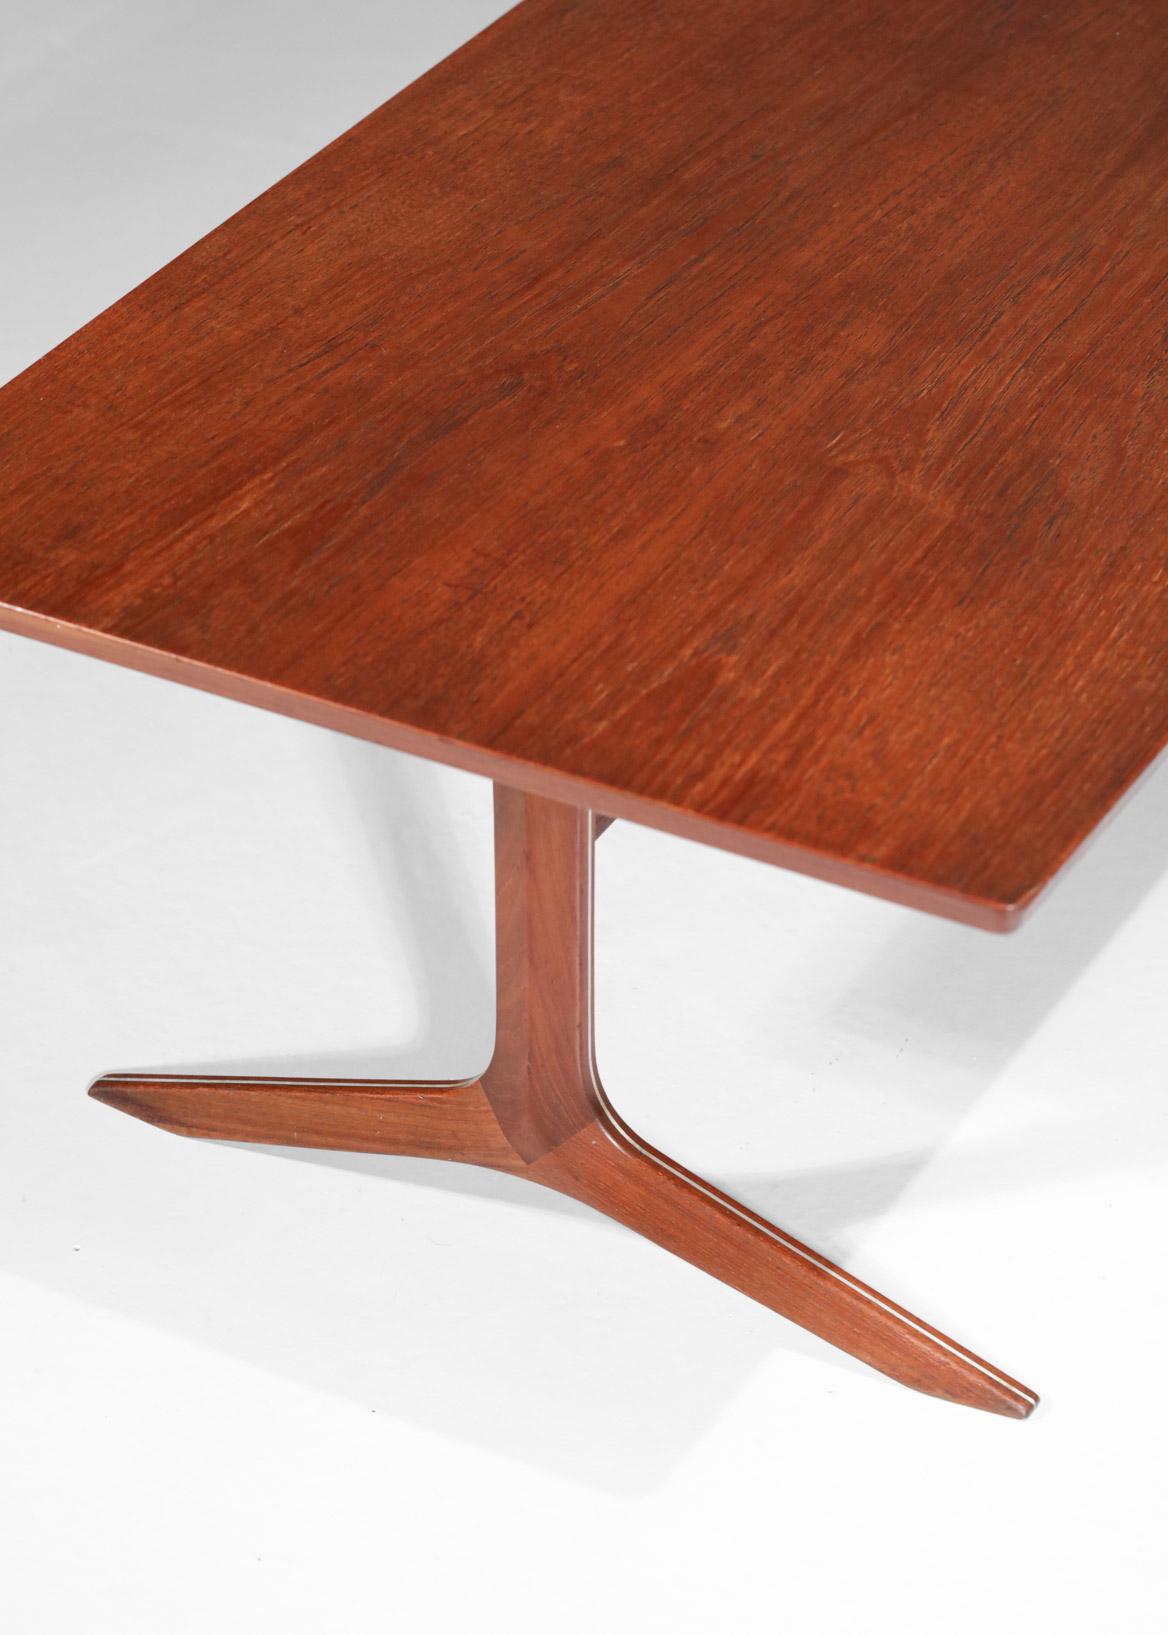 Rare Danish Coffee Table by Peter Hvidt and Orla Molgaard Scandinavian, F143 For Sale 5